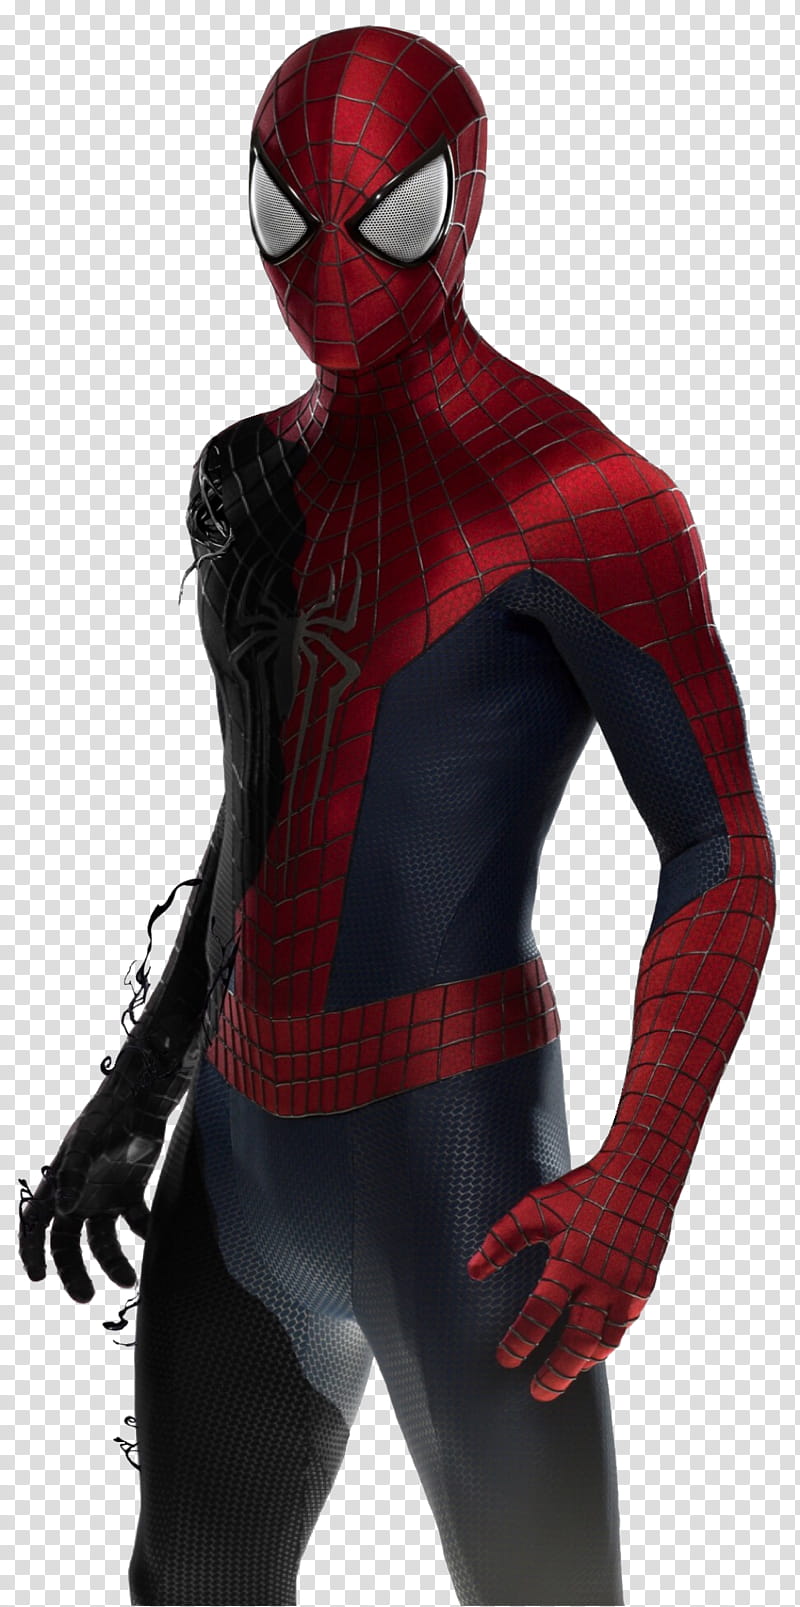 Spider Man Symbiote Transformation transparent background PNG clipart